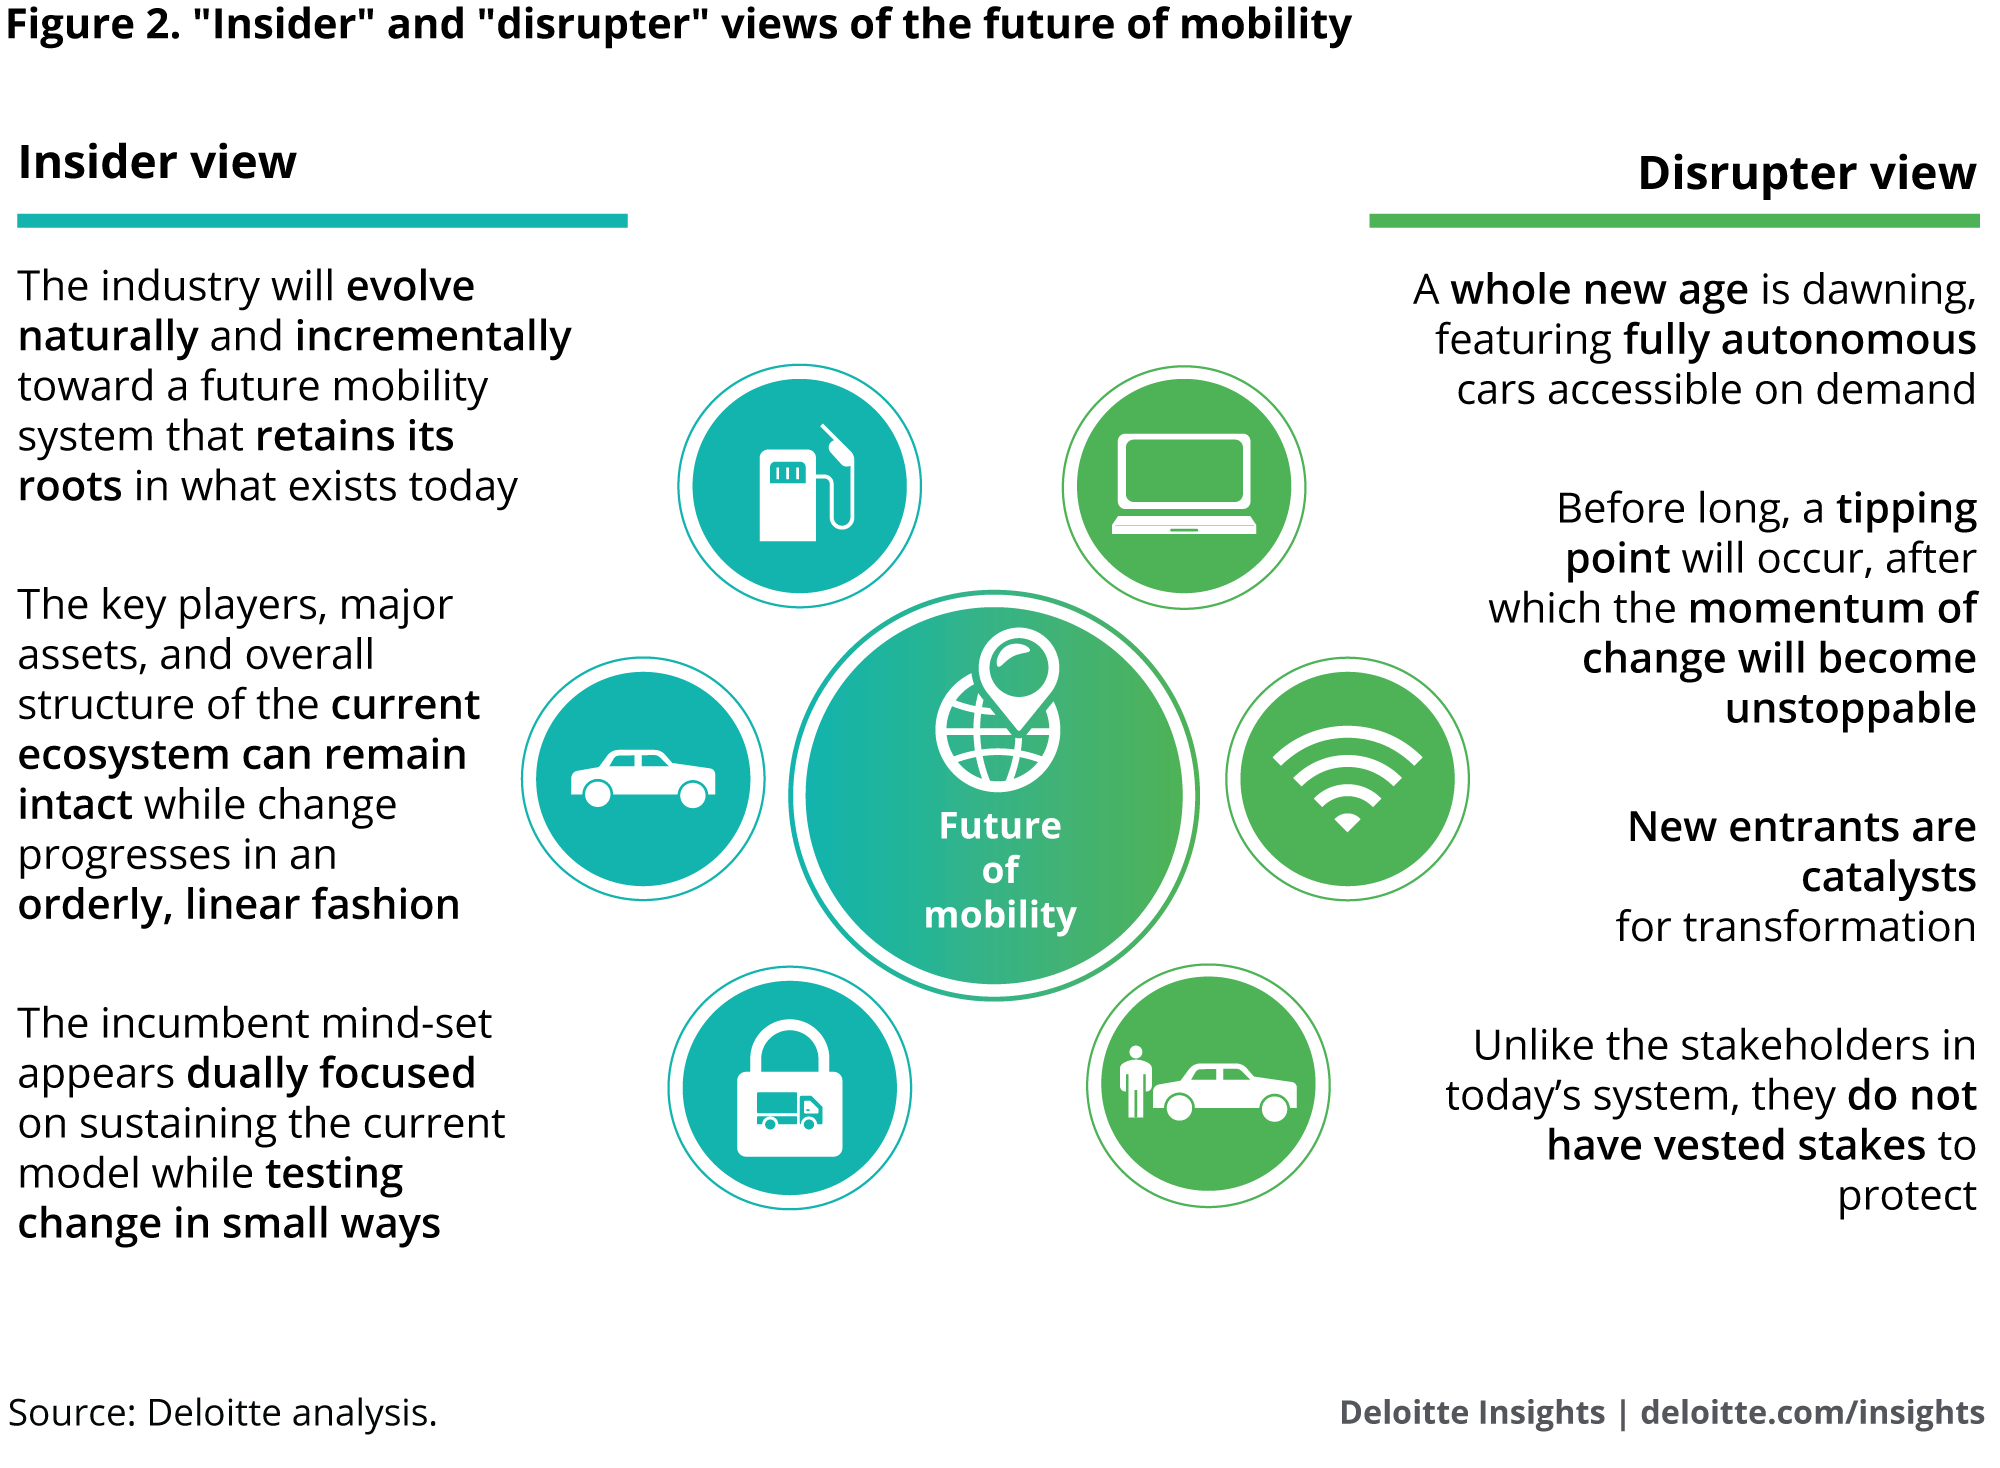 “Insider” and “disrupter” views of the future of mobility